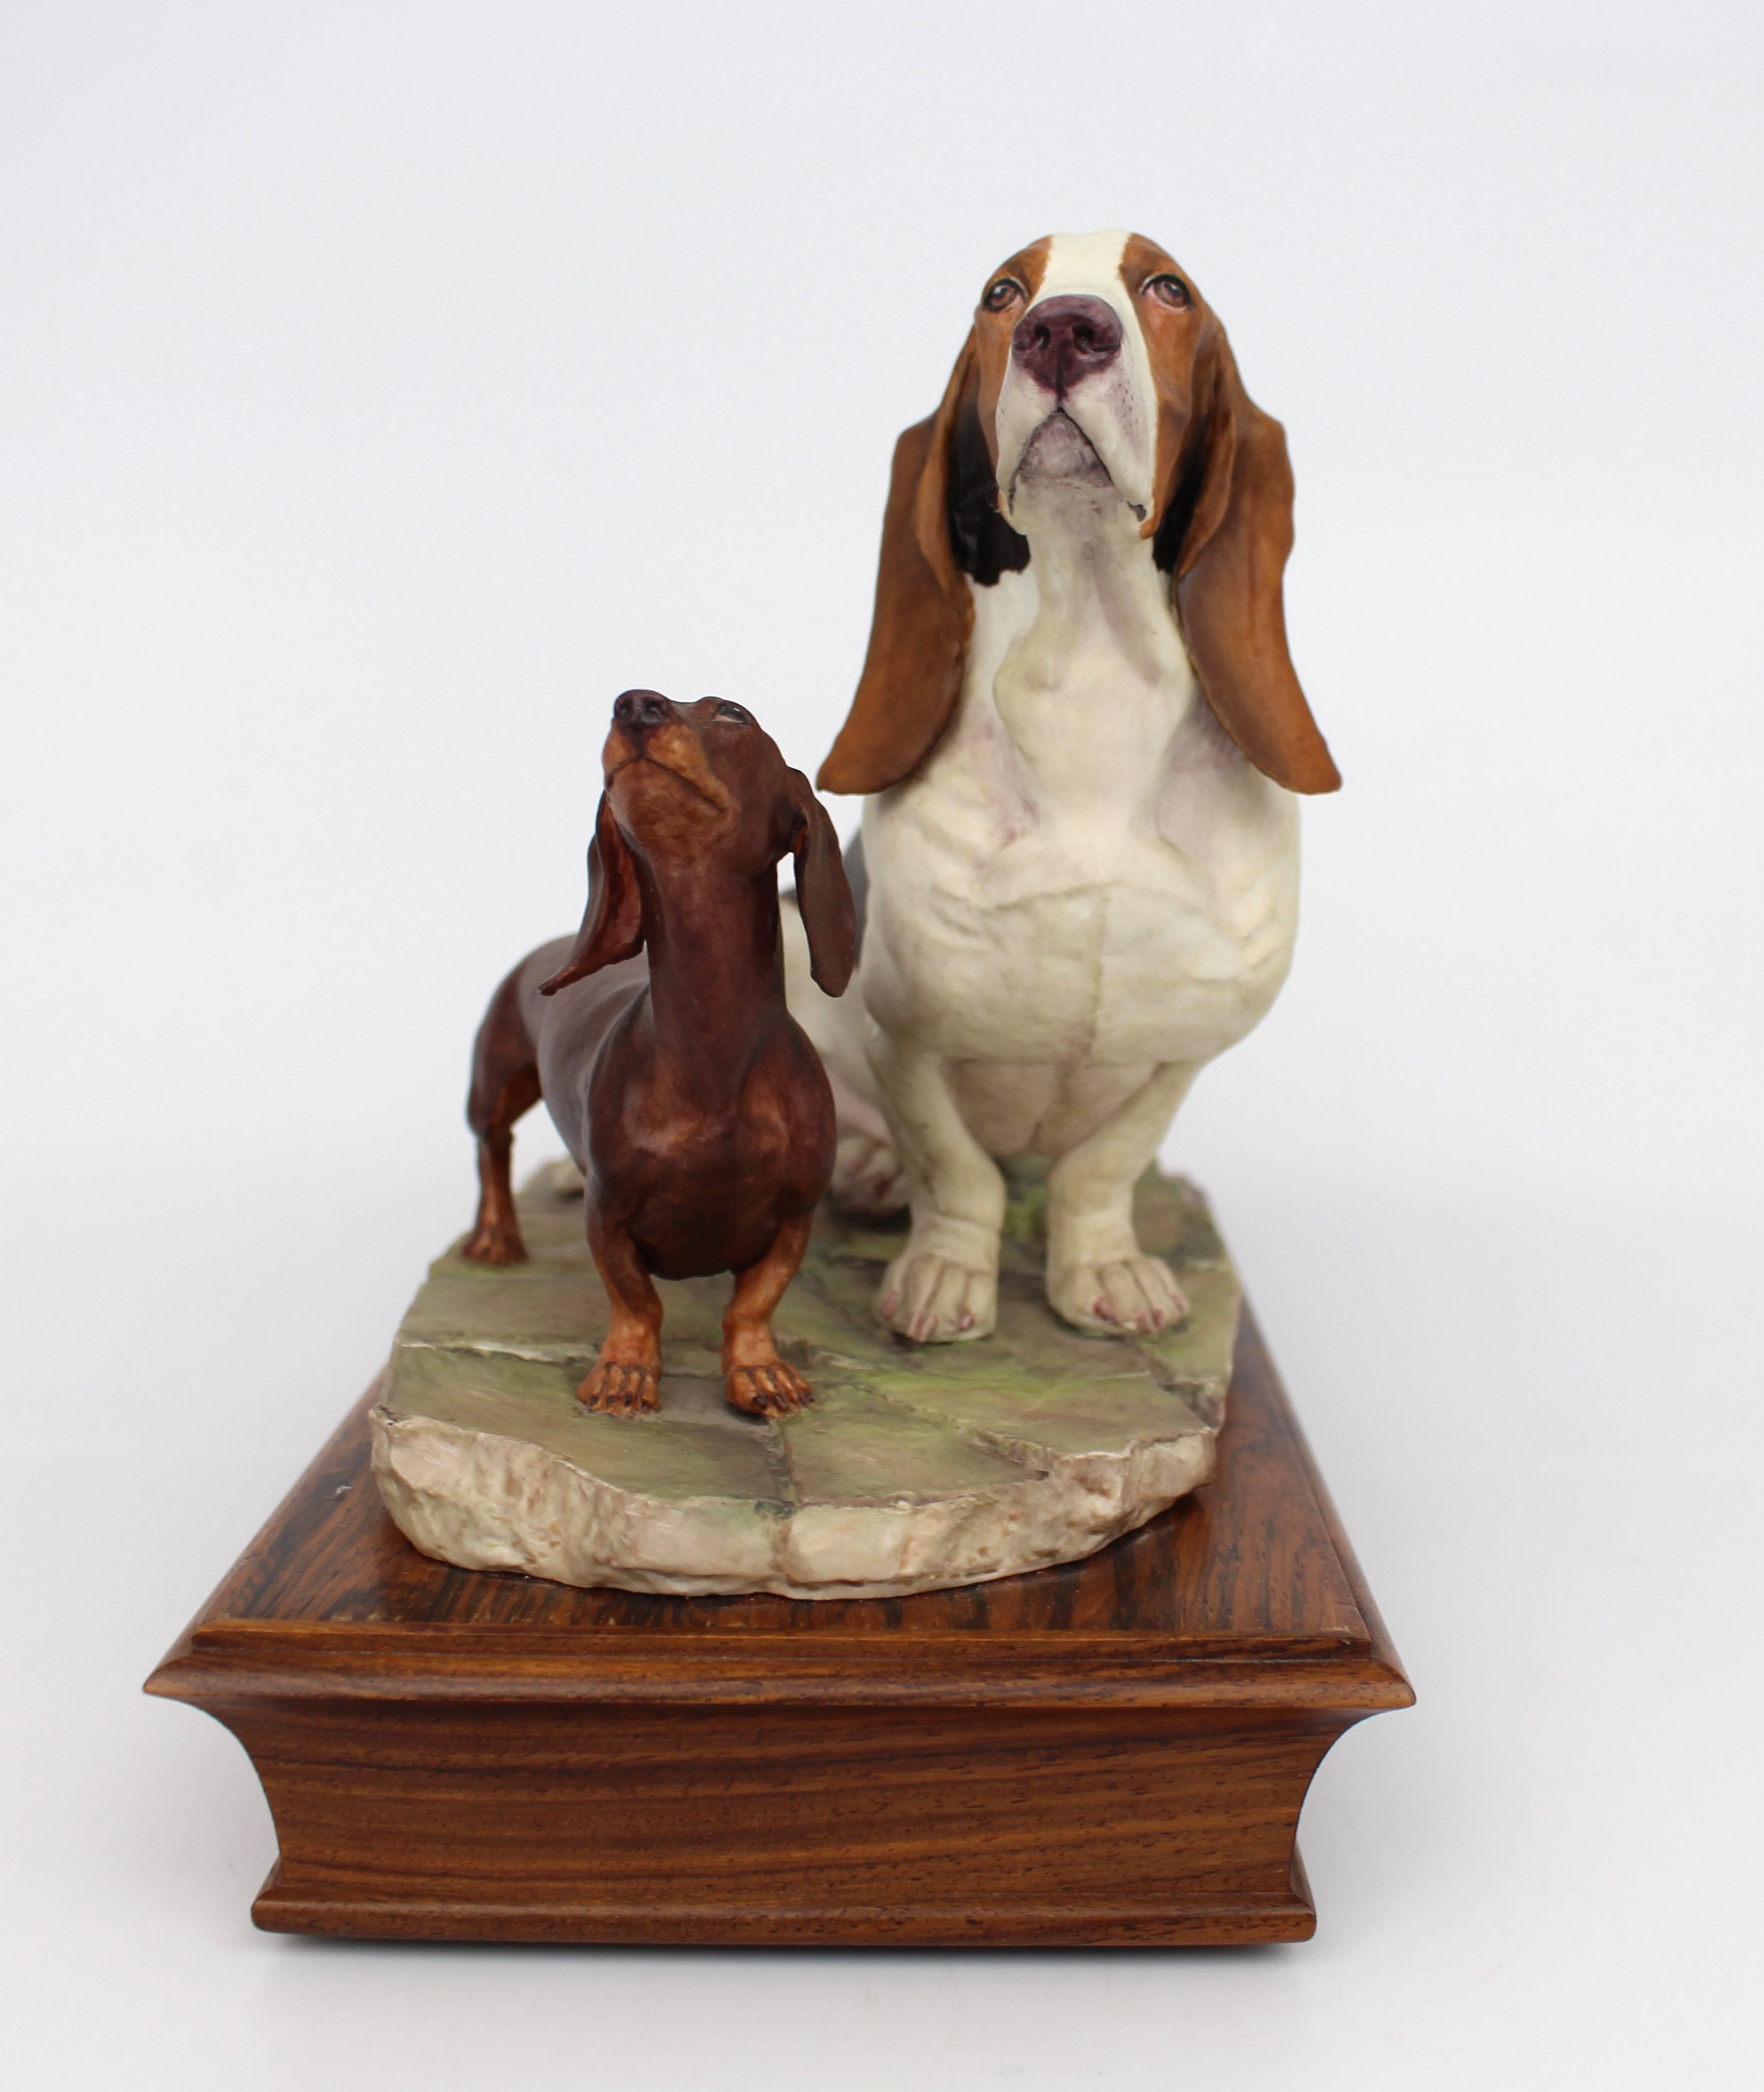 Albany Basset & Dachshund Sculpture - Image 5 of 6